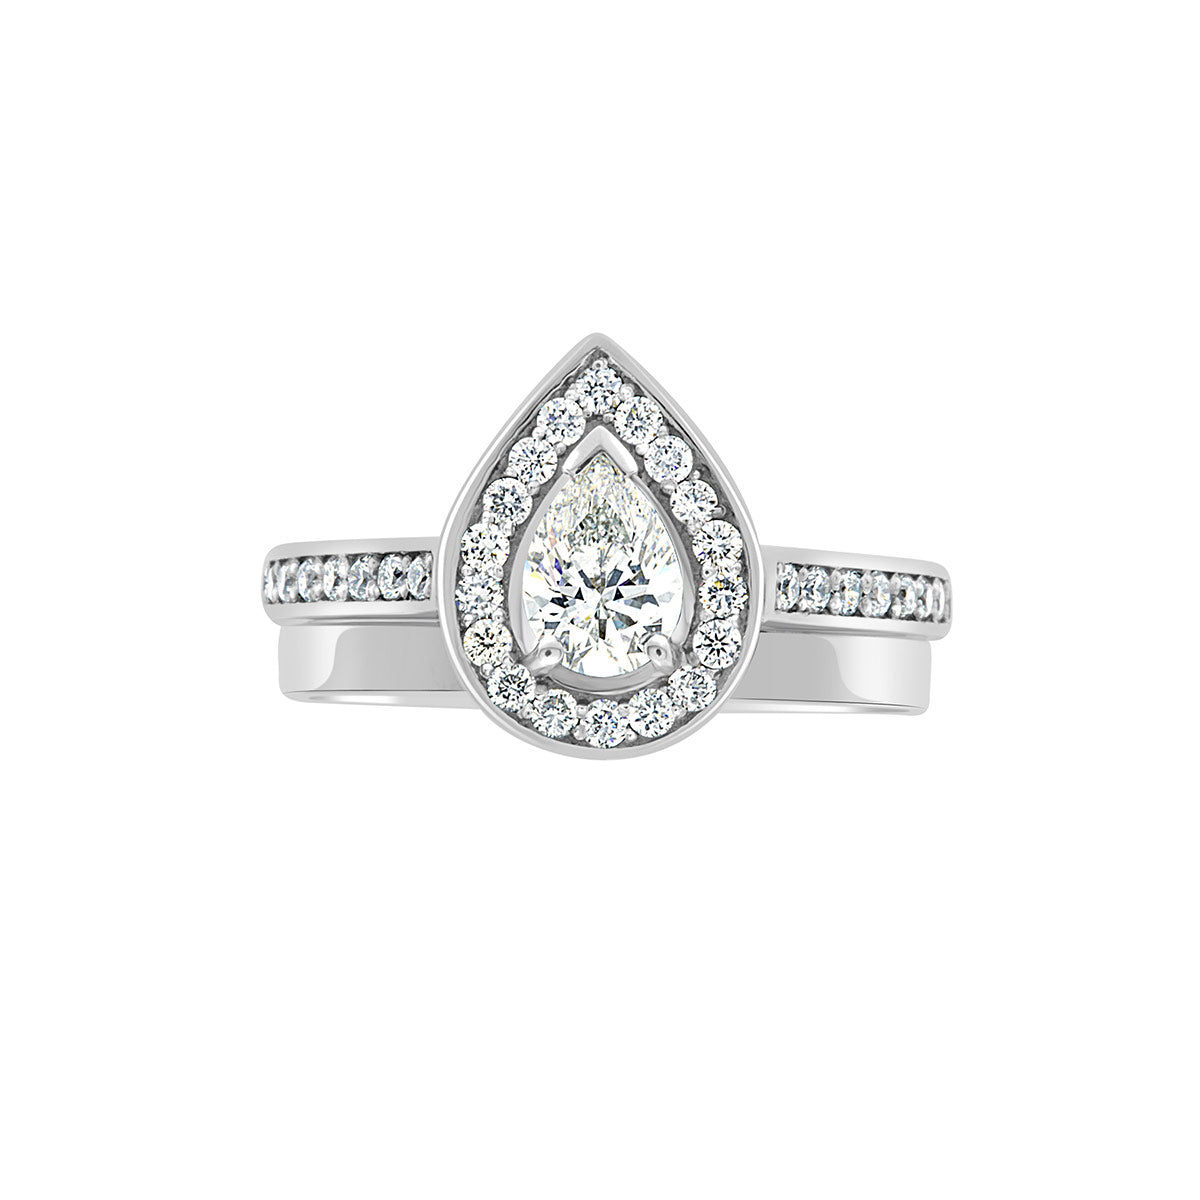 Pear Shaped Halo Engagement Ring in white gold, with a matching plain wedding ring, white background